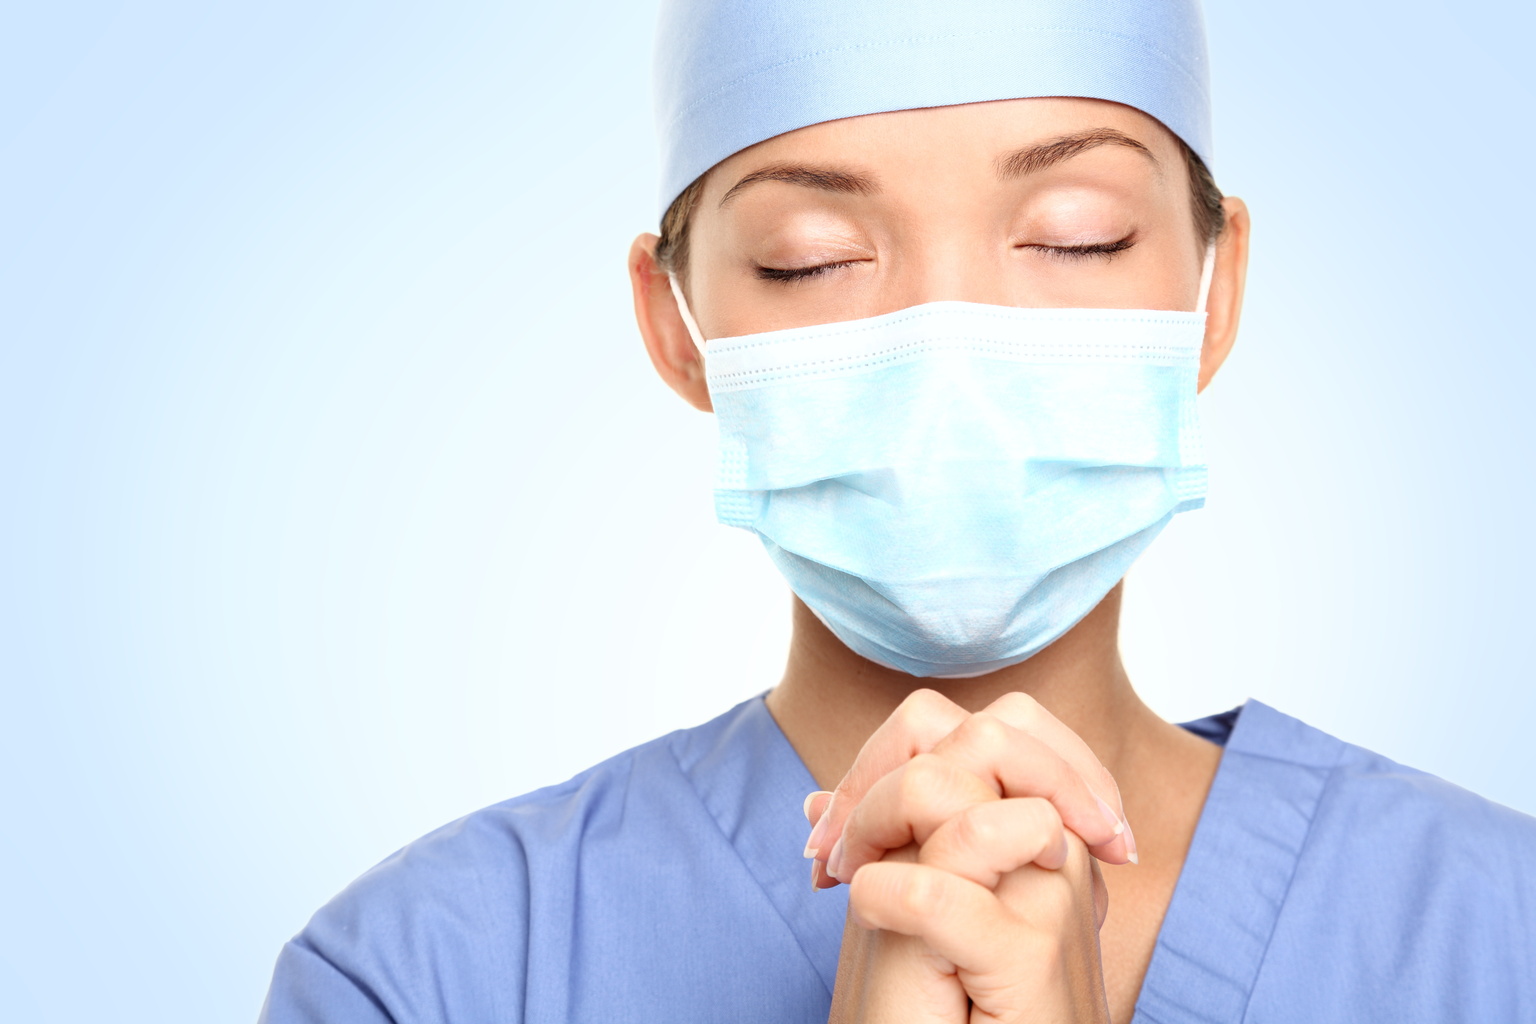 Self-care for nurses during the pandemic: How spiritual practices may help